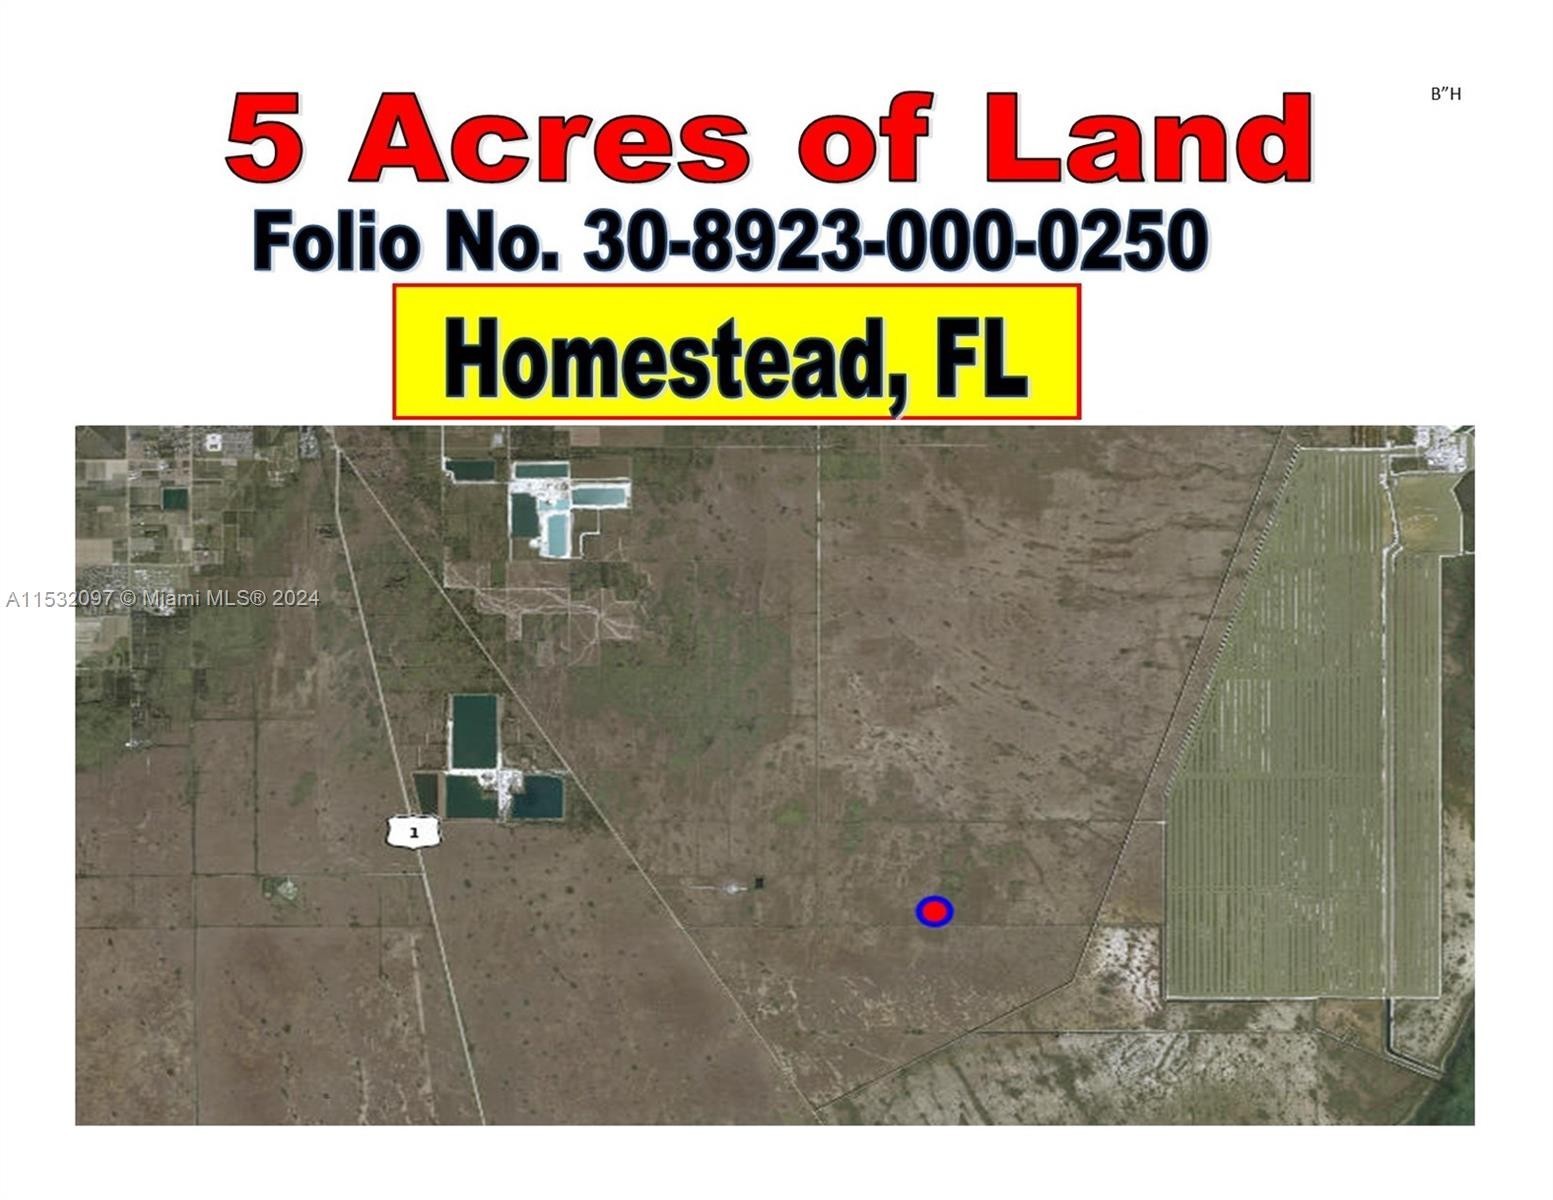 1. Land Located In Homestead